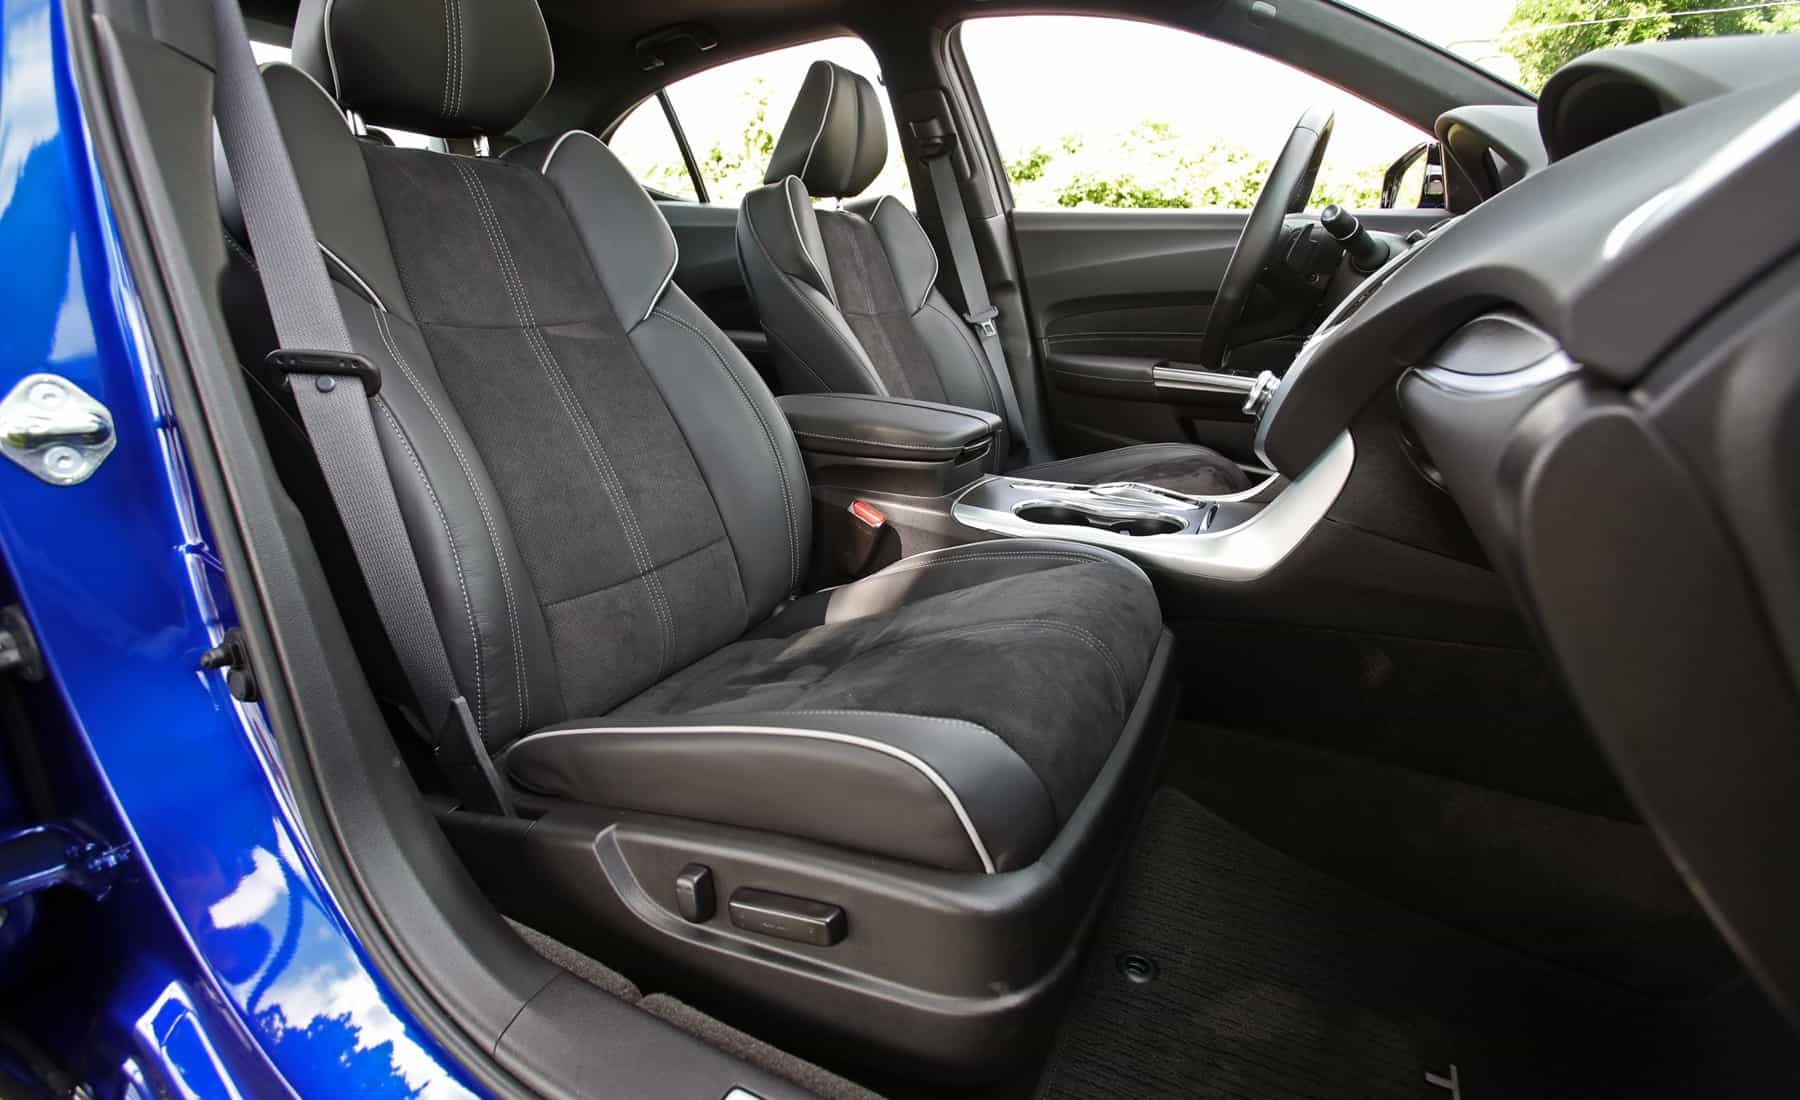 2018 Acura TLX Interior Seats Front (View 24 of 46)